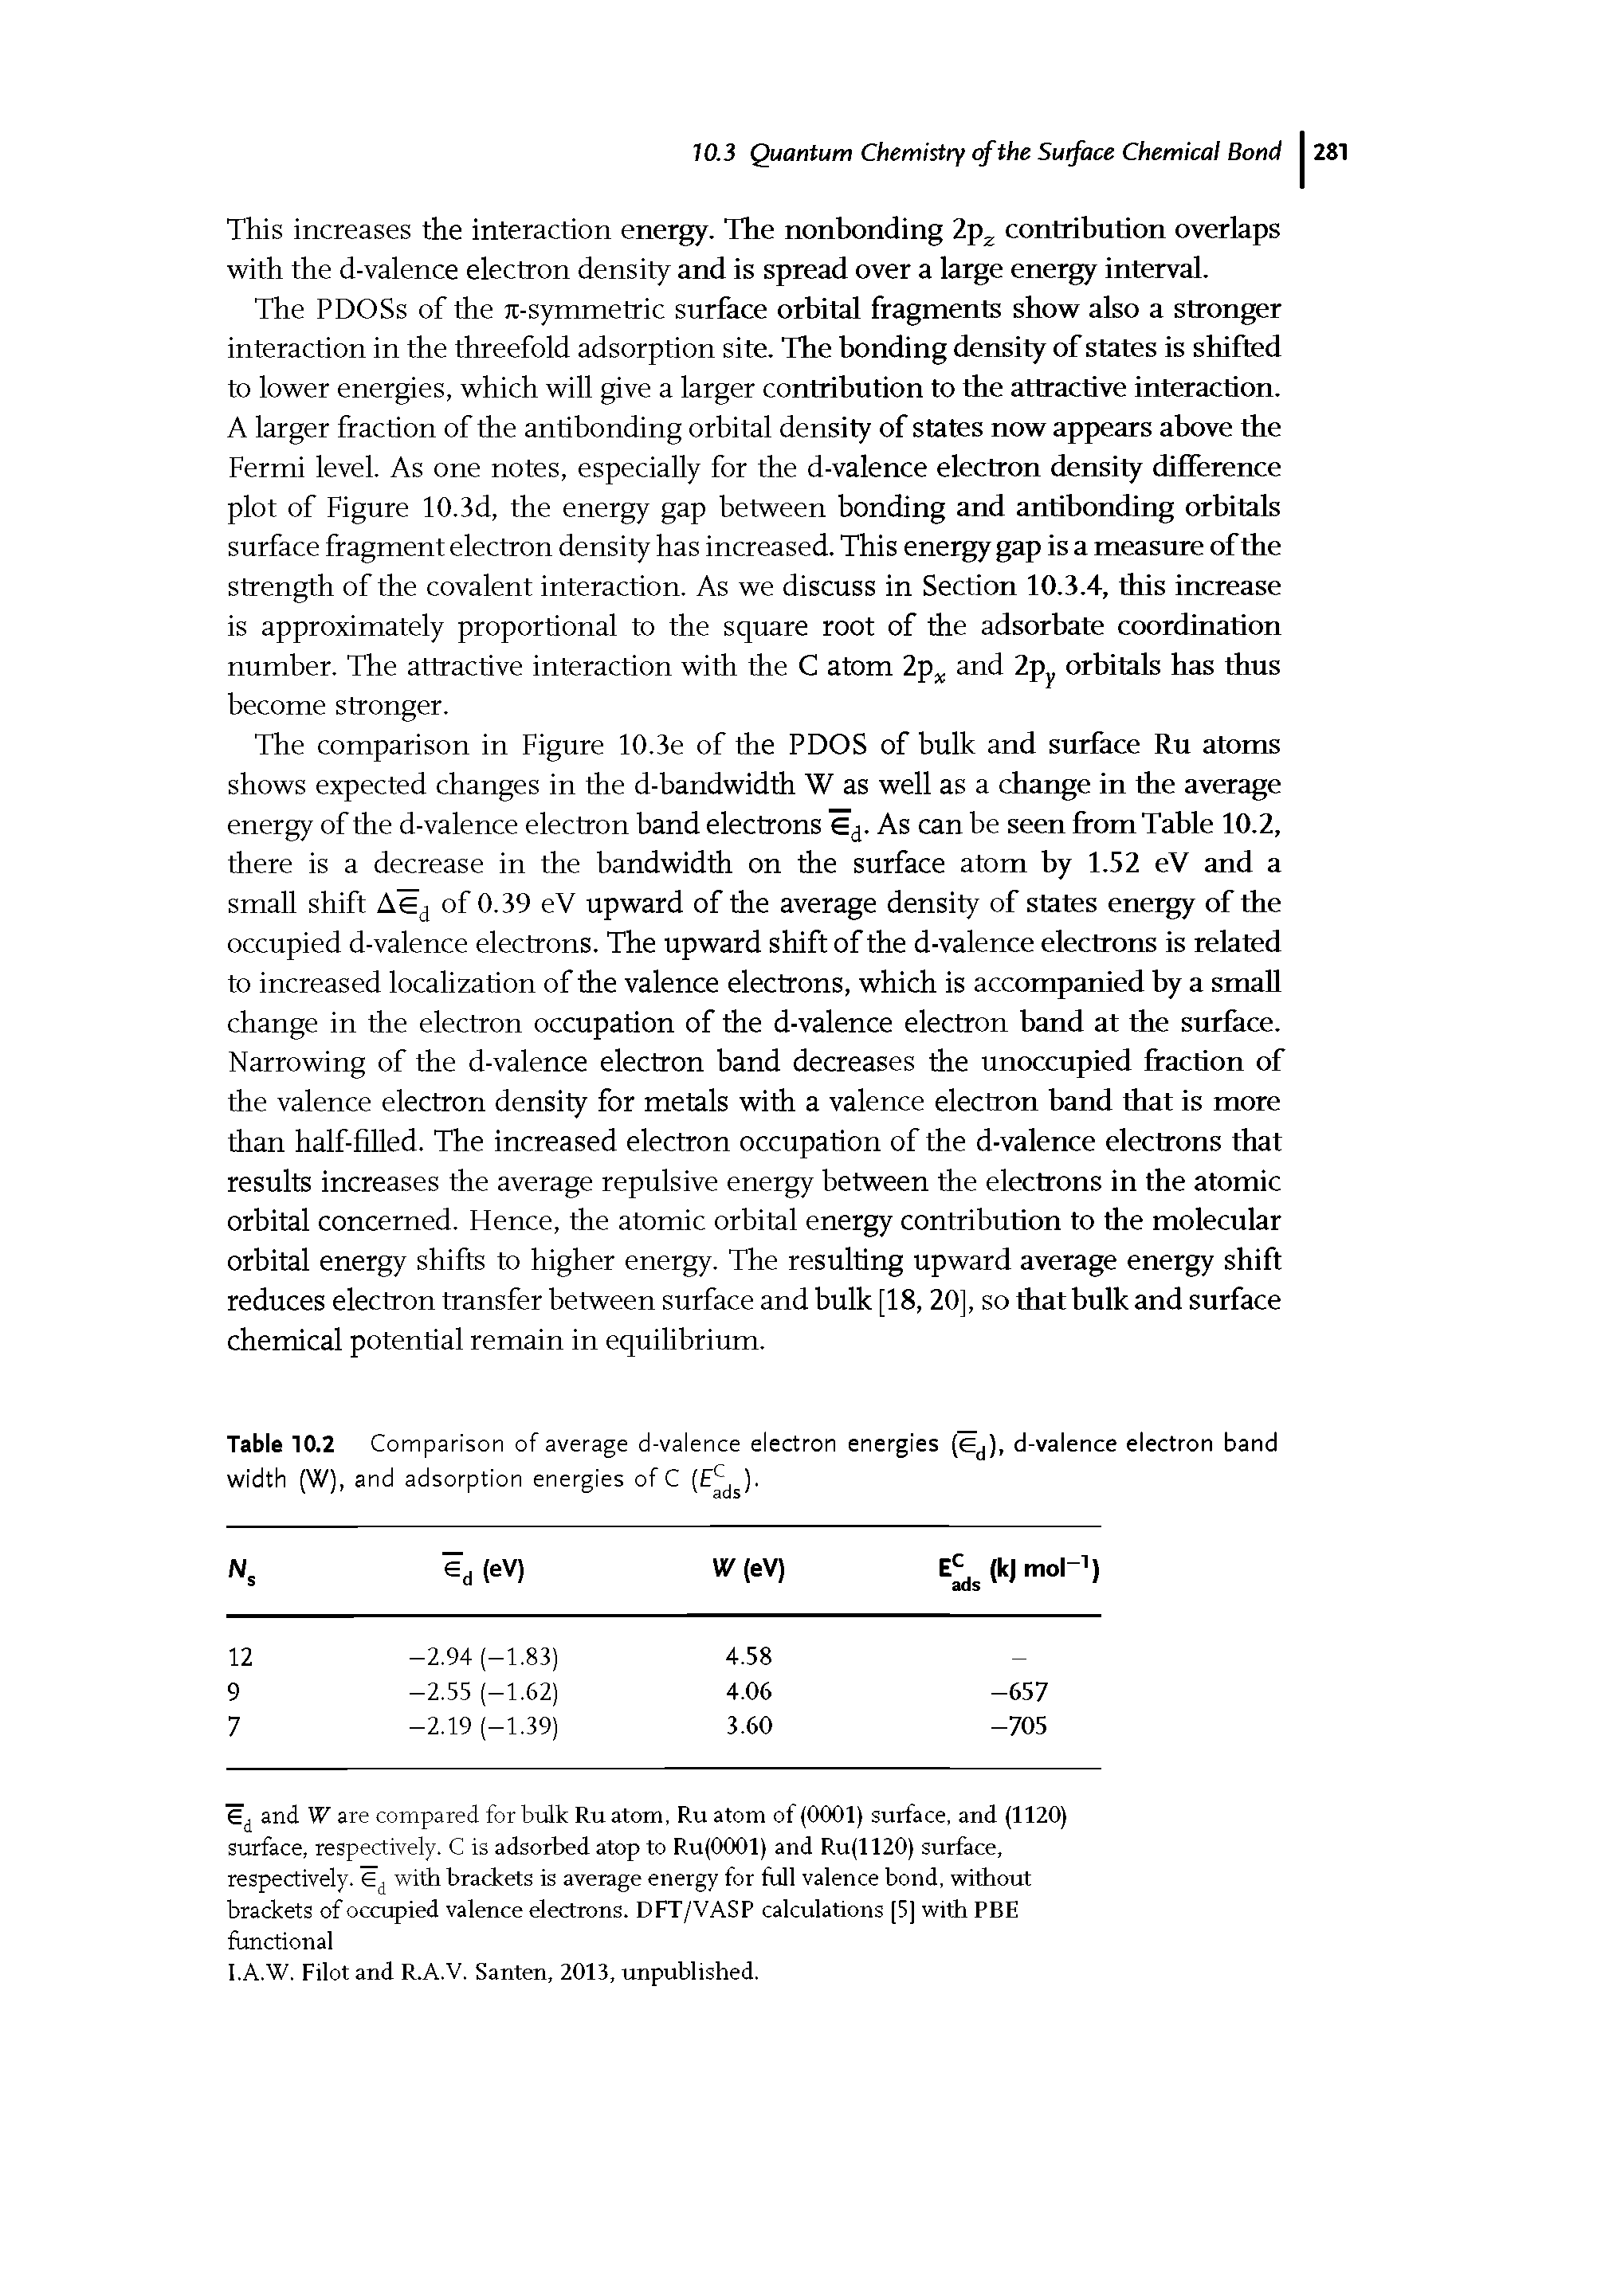 Table 10.2 Comparison of average d-valence electron energies (Sj), d-valence electron band width (W), and adsorption energies of C (E ).